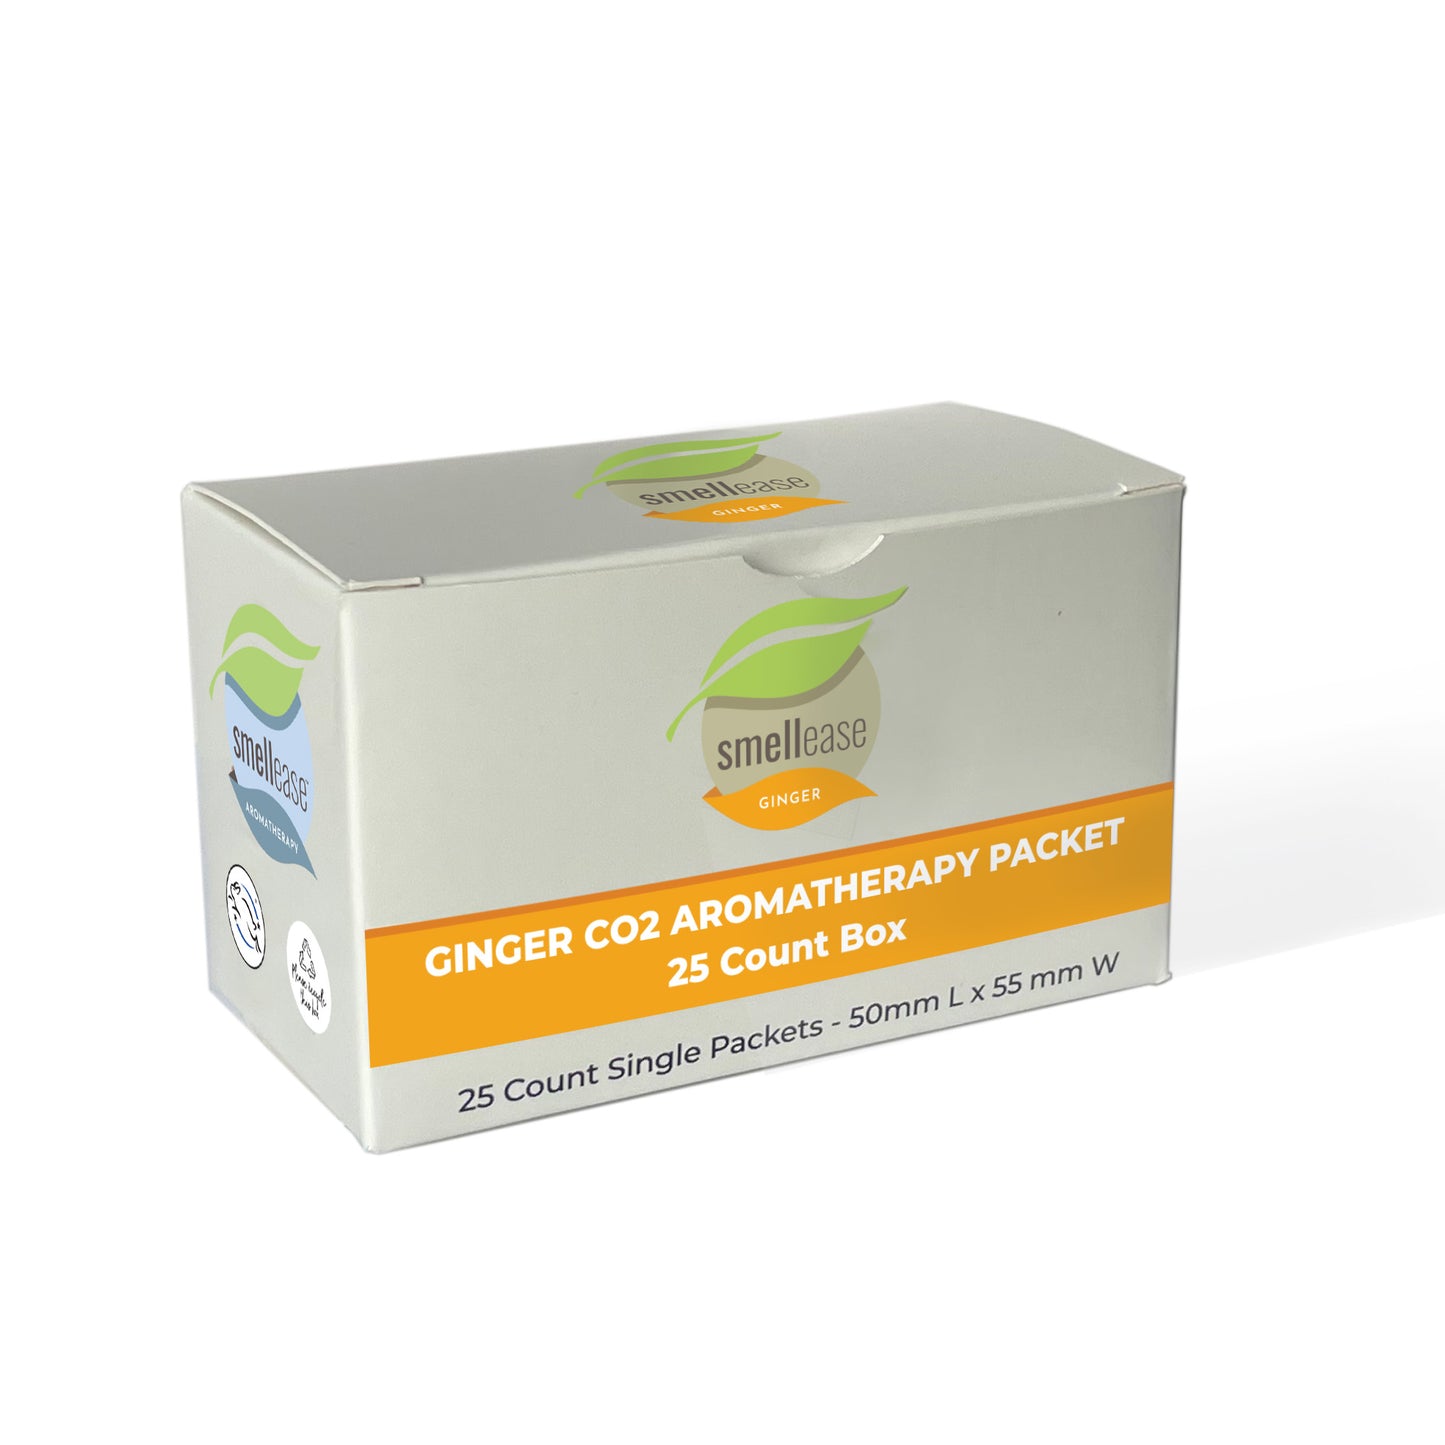 Ginger Aromatherapy Packets  25 Count Box